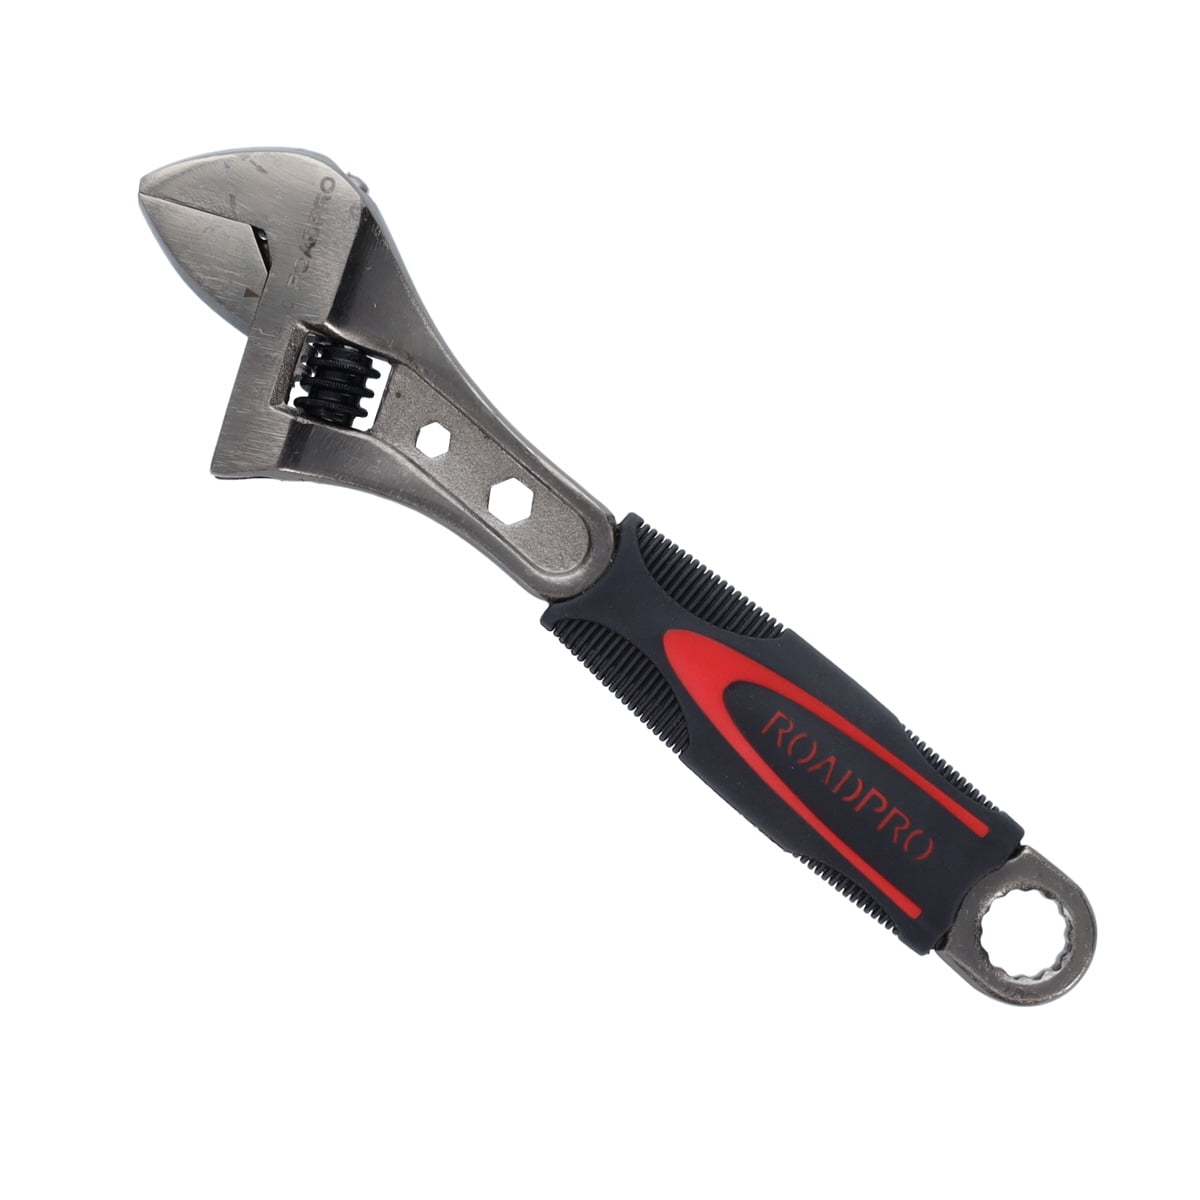 RoadPro RPS2012 10 Adjustable Wrench 